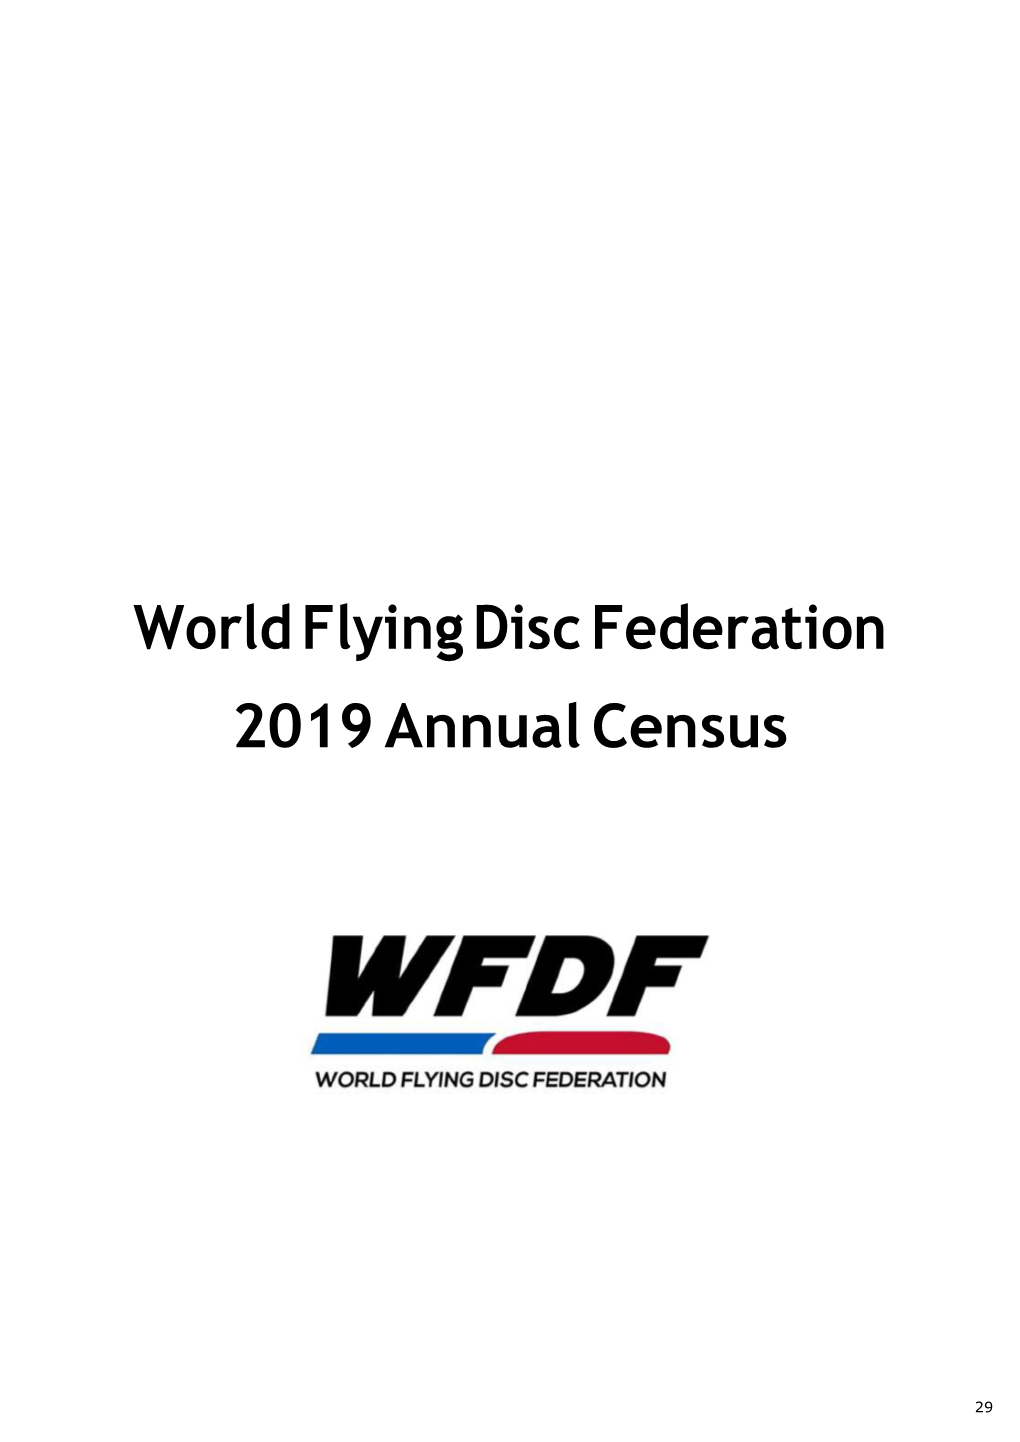 World Flying Disc Federation 2019 Annual Census